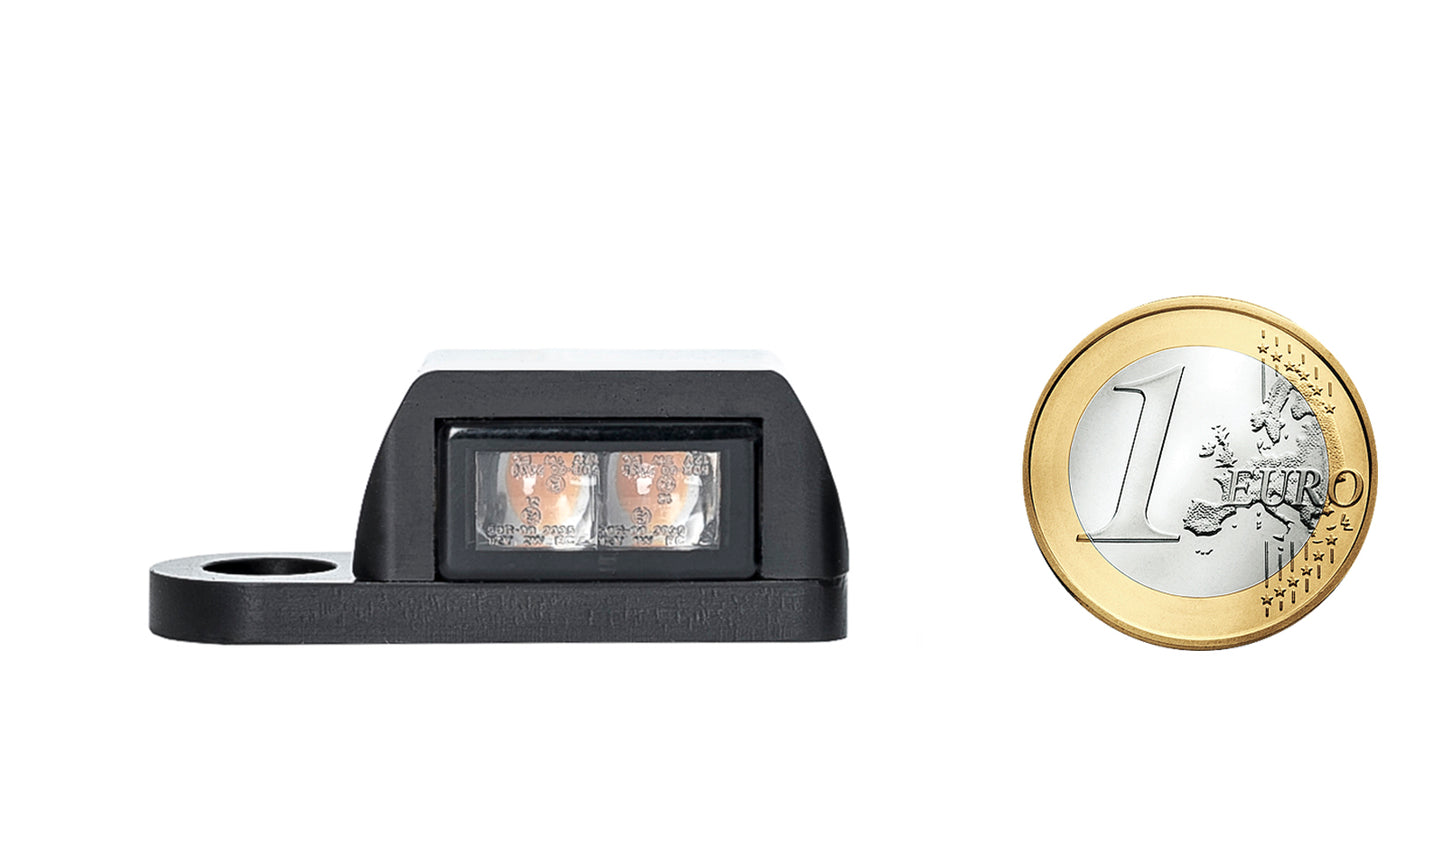 Harley Davidson "Turbo" led turn signals by Killer Custom size comparison with a euro coin white background